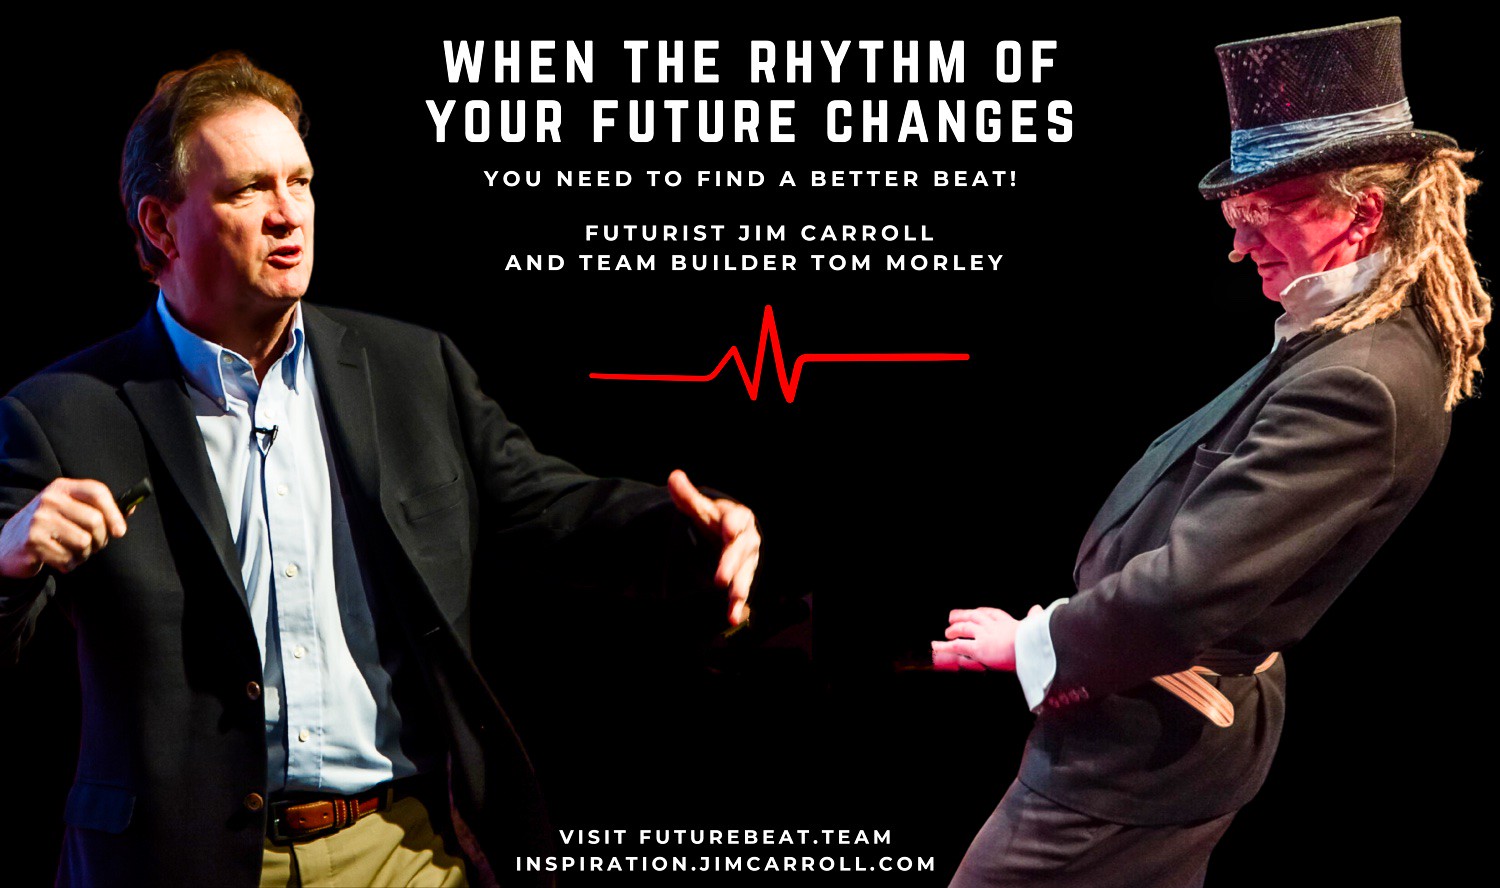 Daily Inspiration: "When the rhythm of your future changes, you need to find a better beat!" - Futurist Jim Carroll